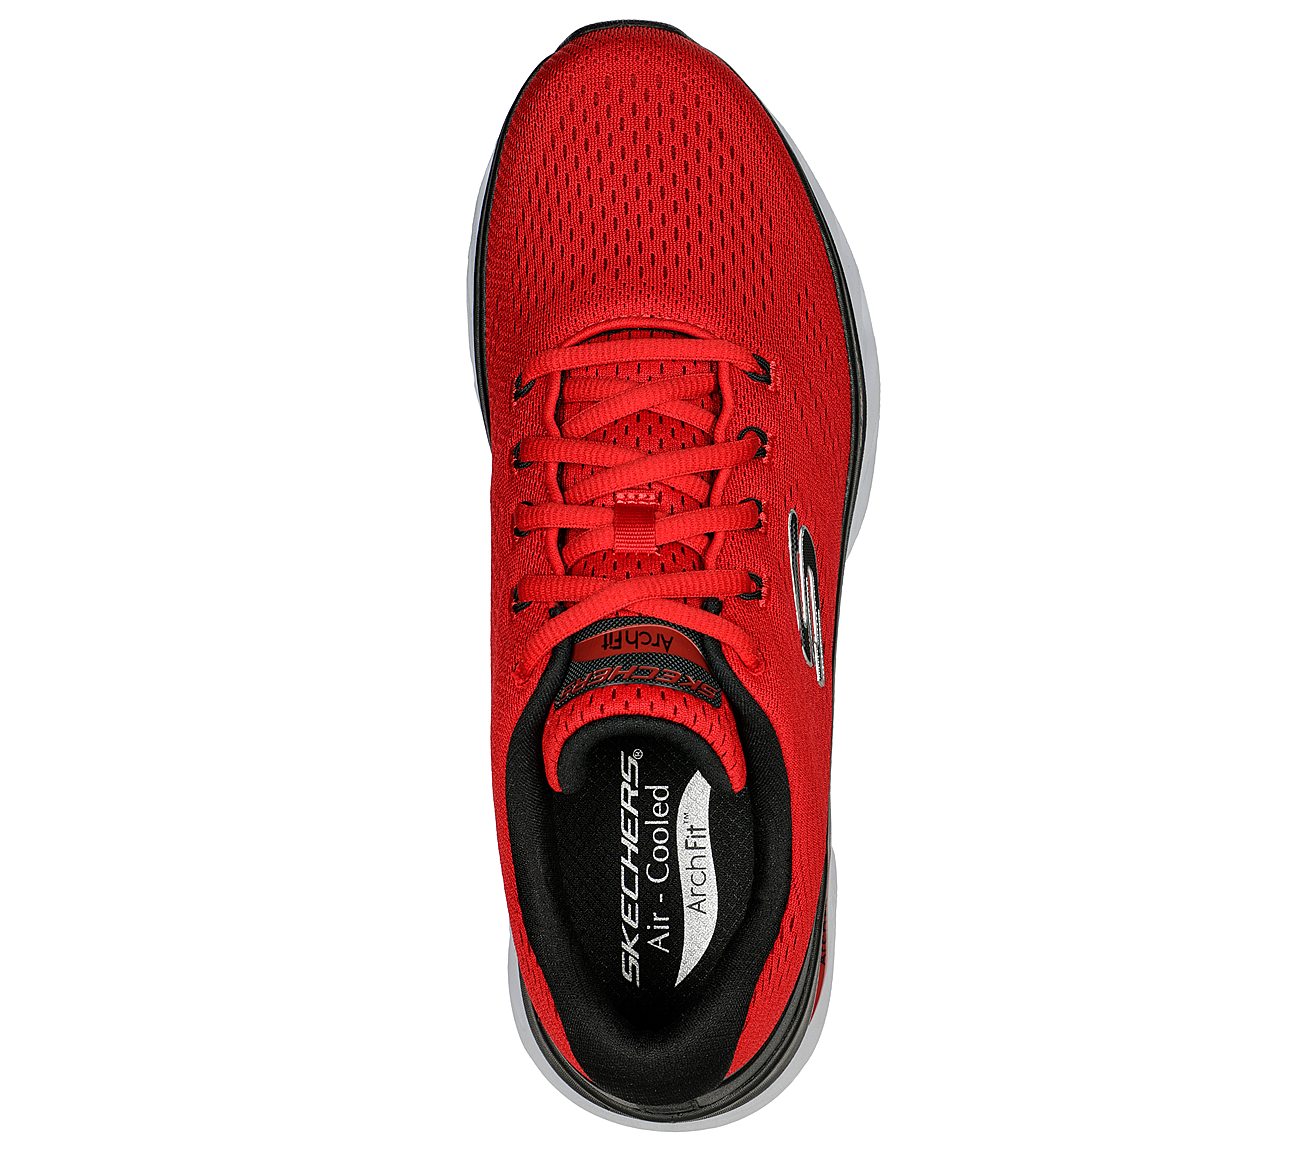 ARCH FIT GLIDE-STEP, RED/BLACK Footwear Top View